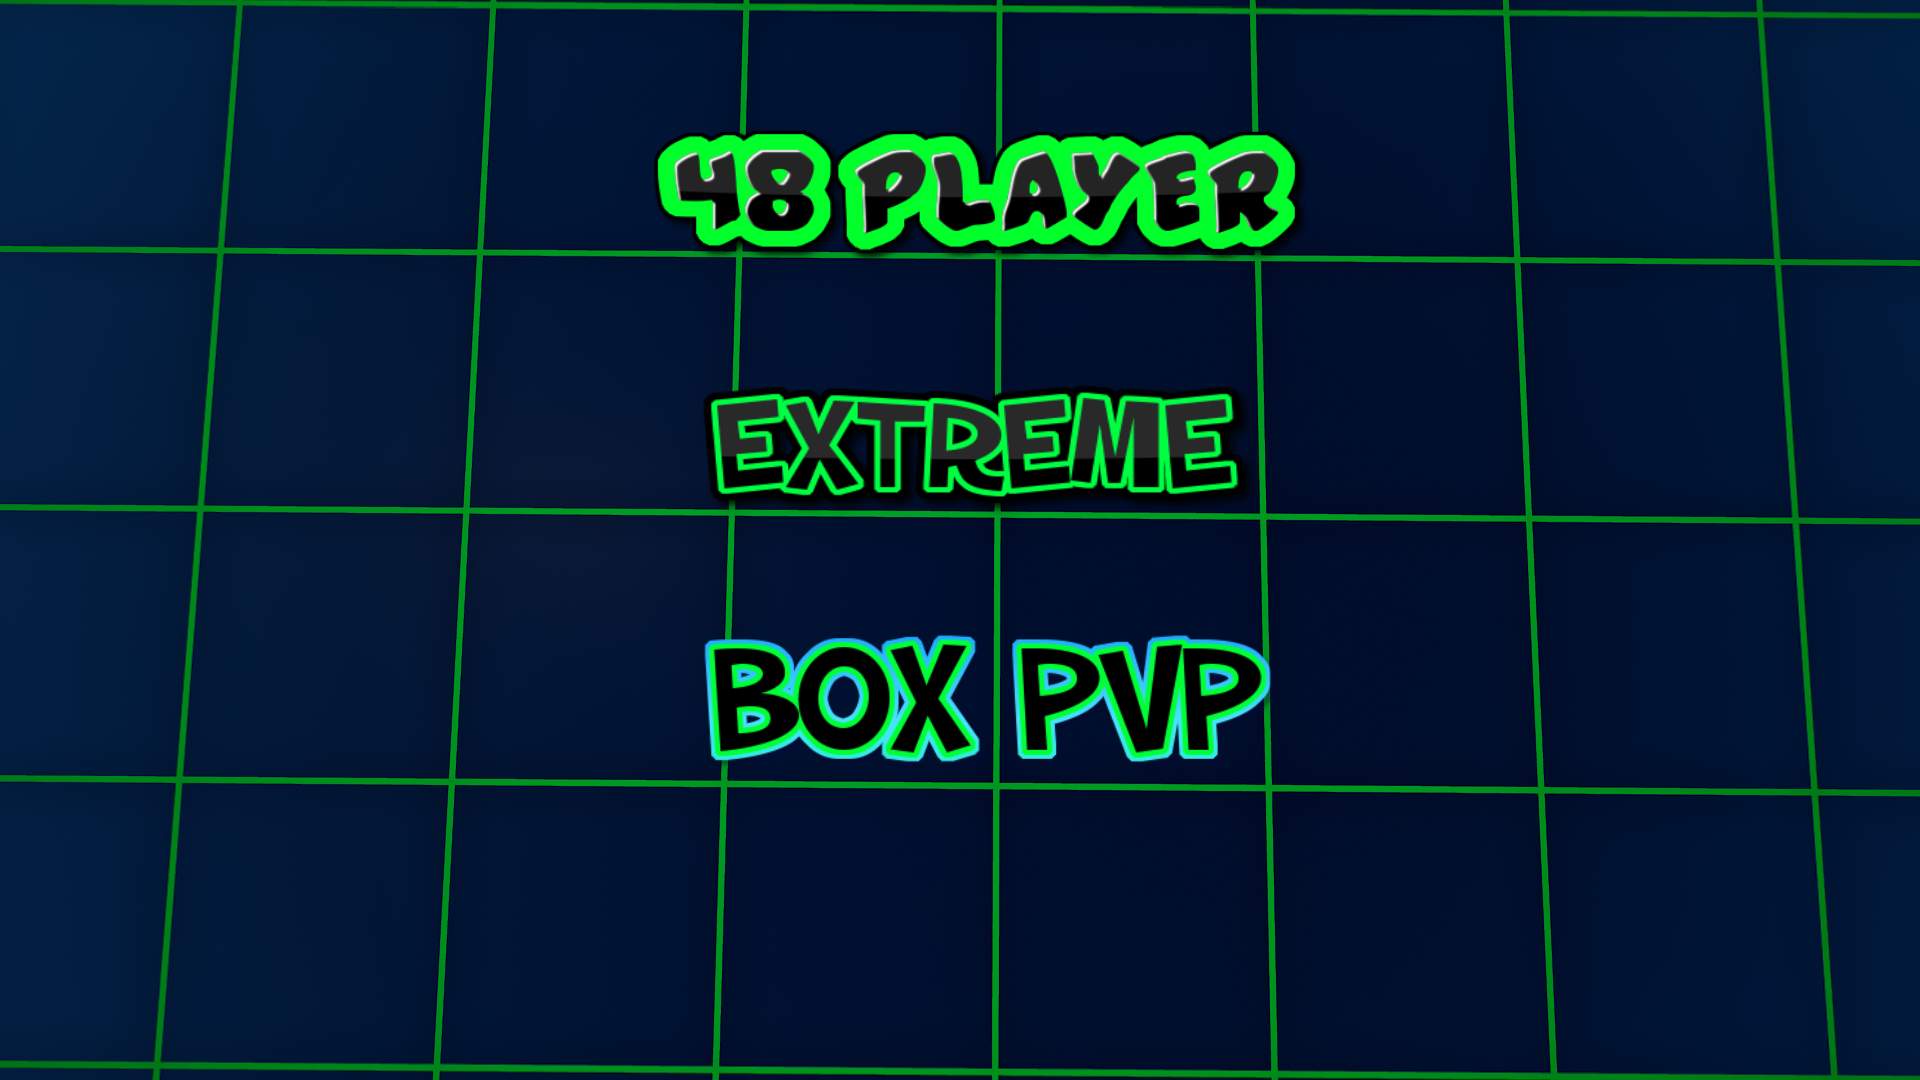 48 PLAYER EXTREME SOLO BOX PVP